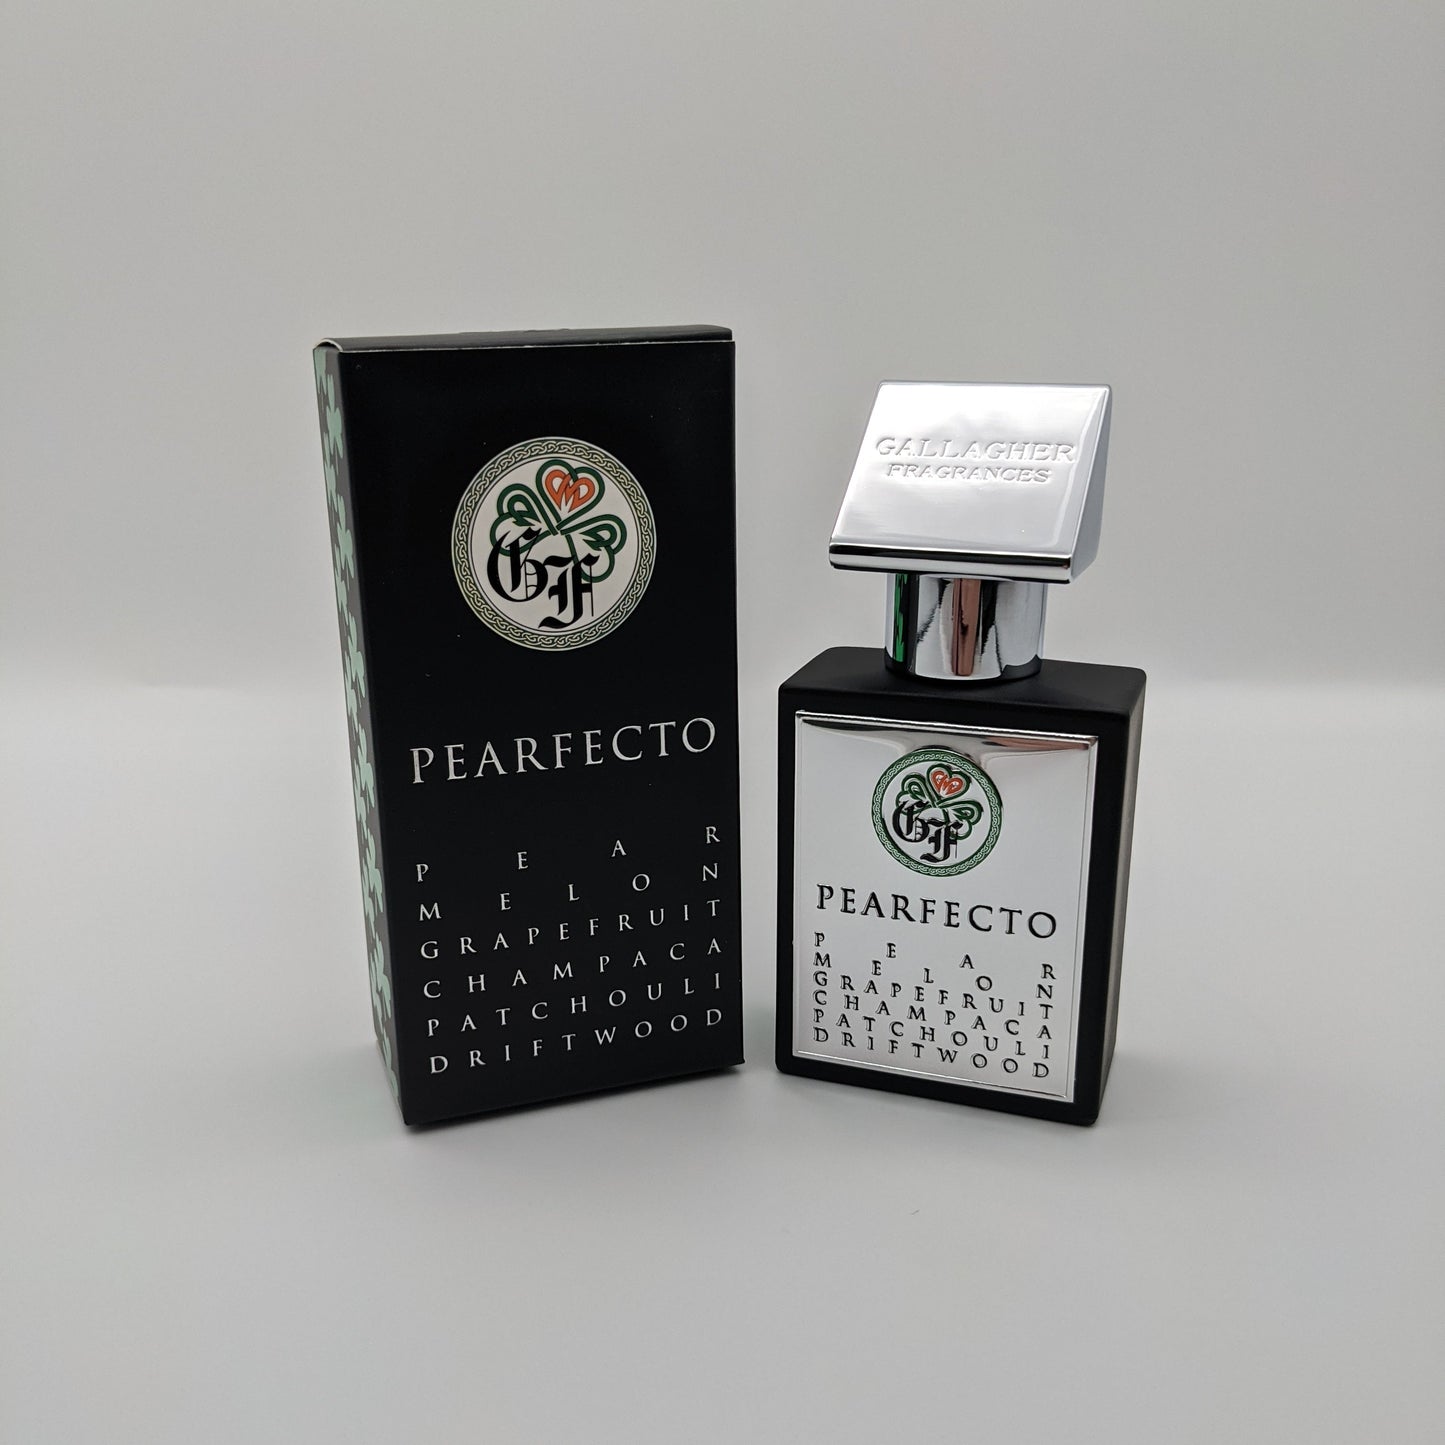 Pearfecto - Limited Edition